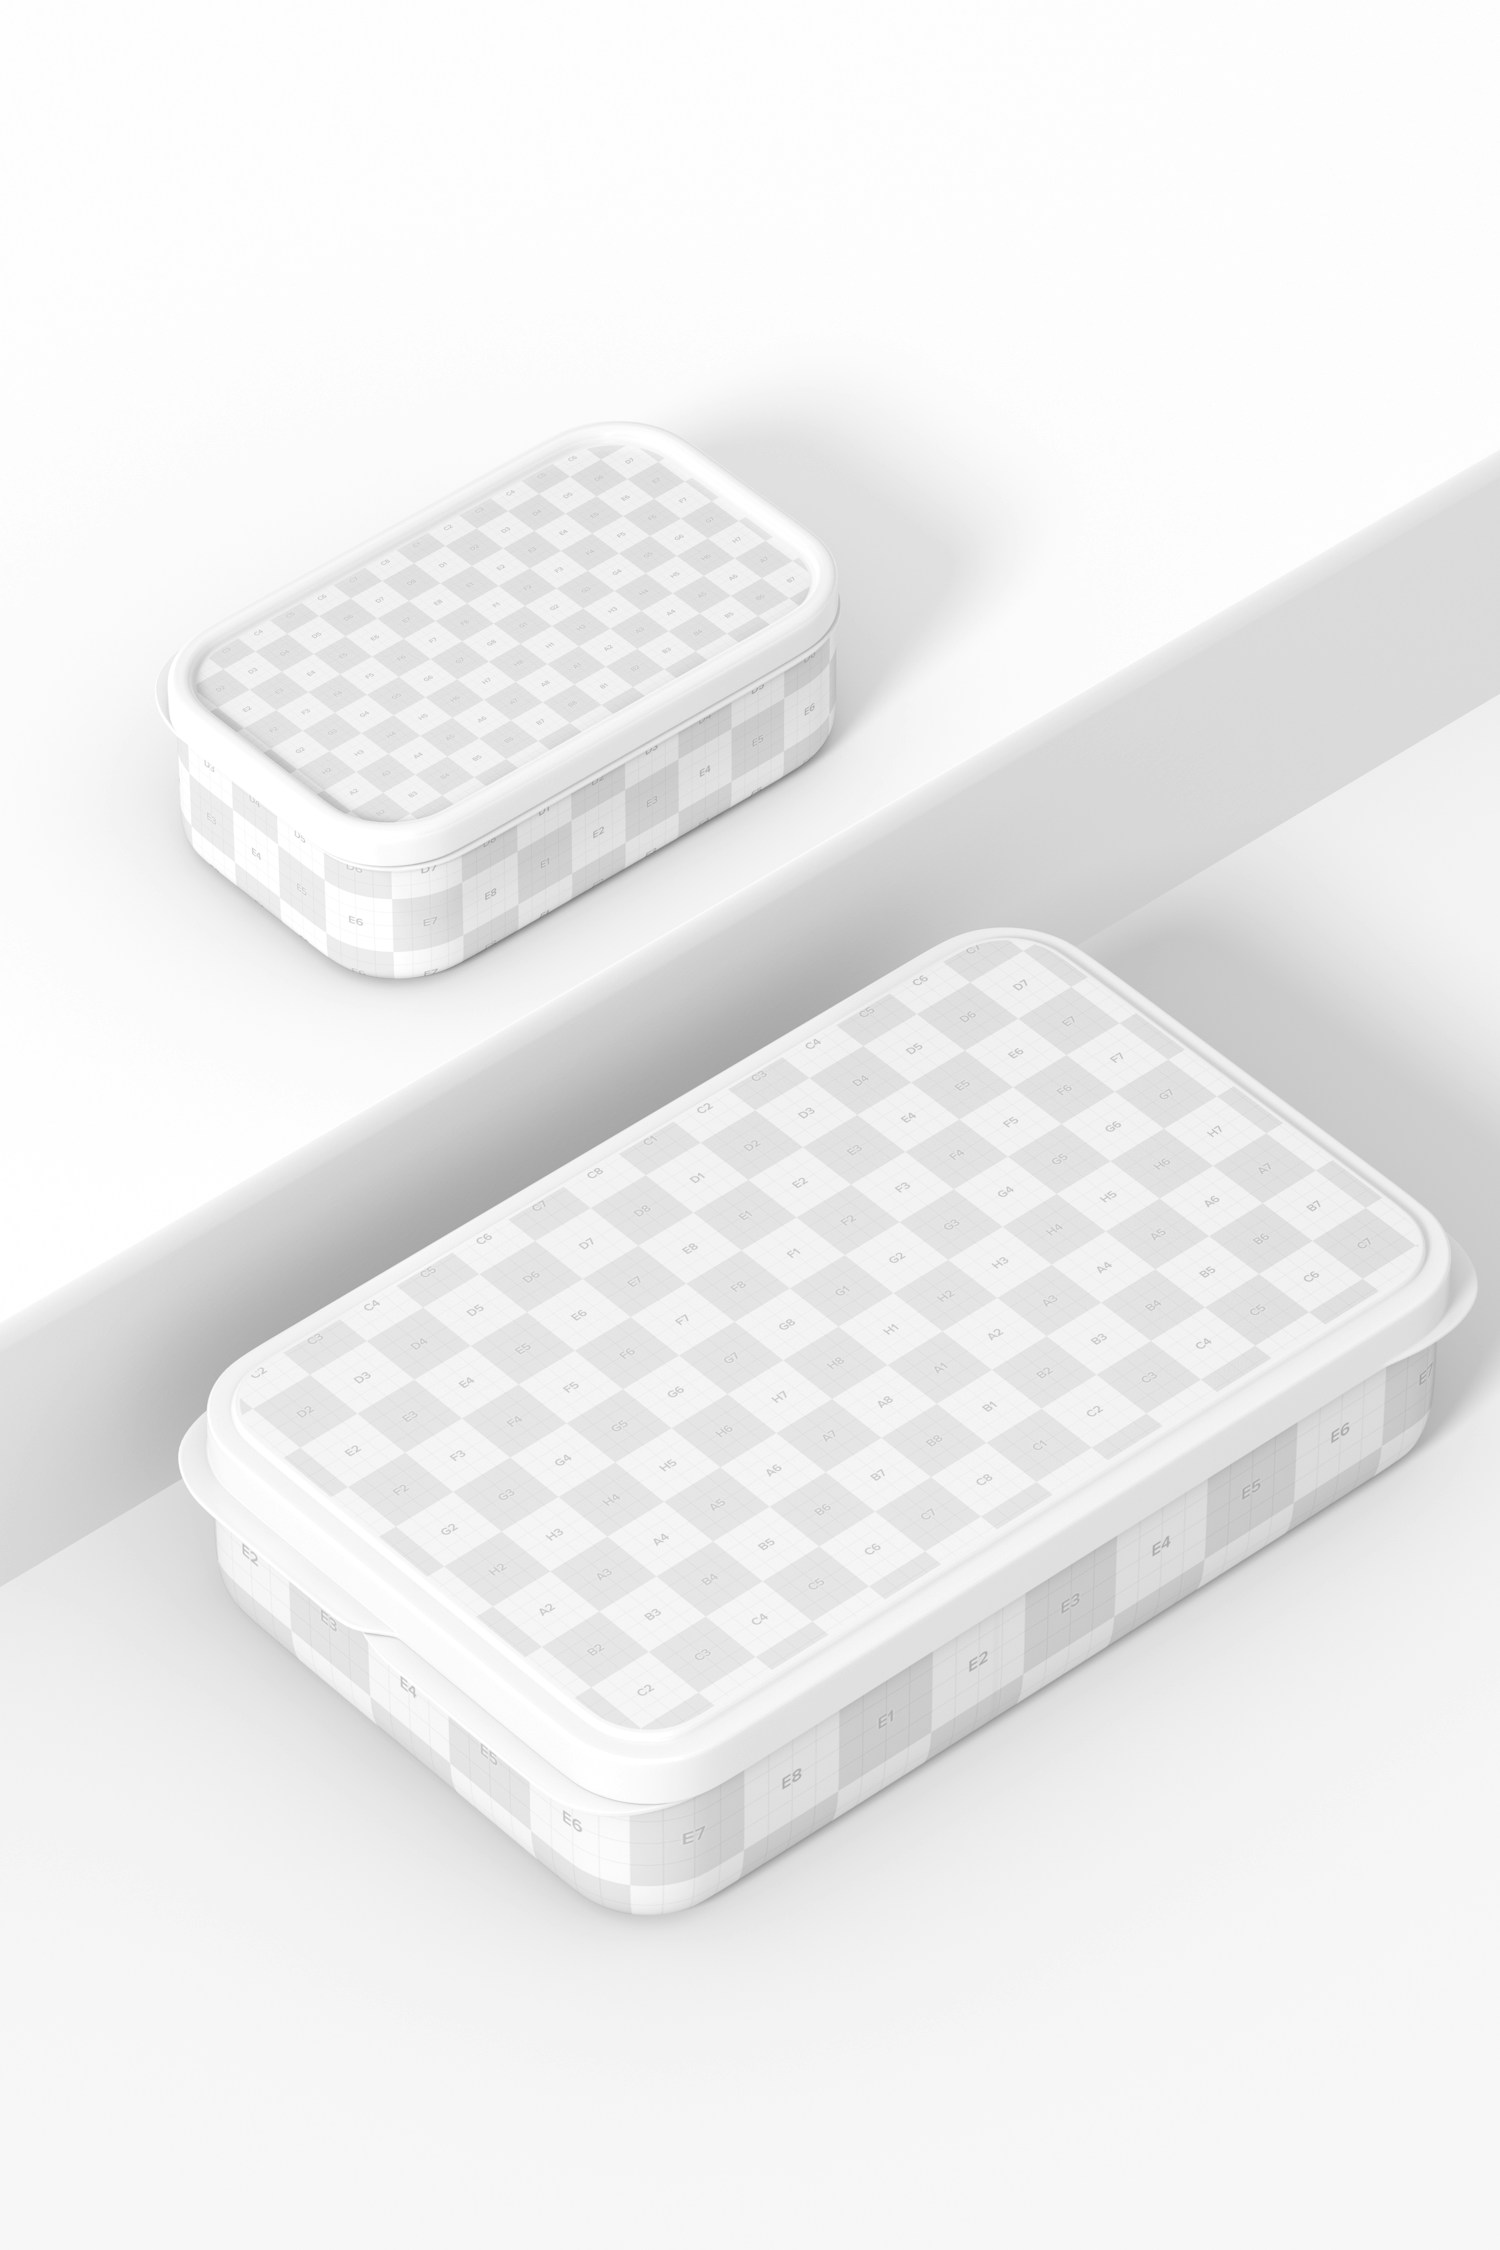 Lunch Boxes Mockup, Perspective View